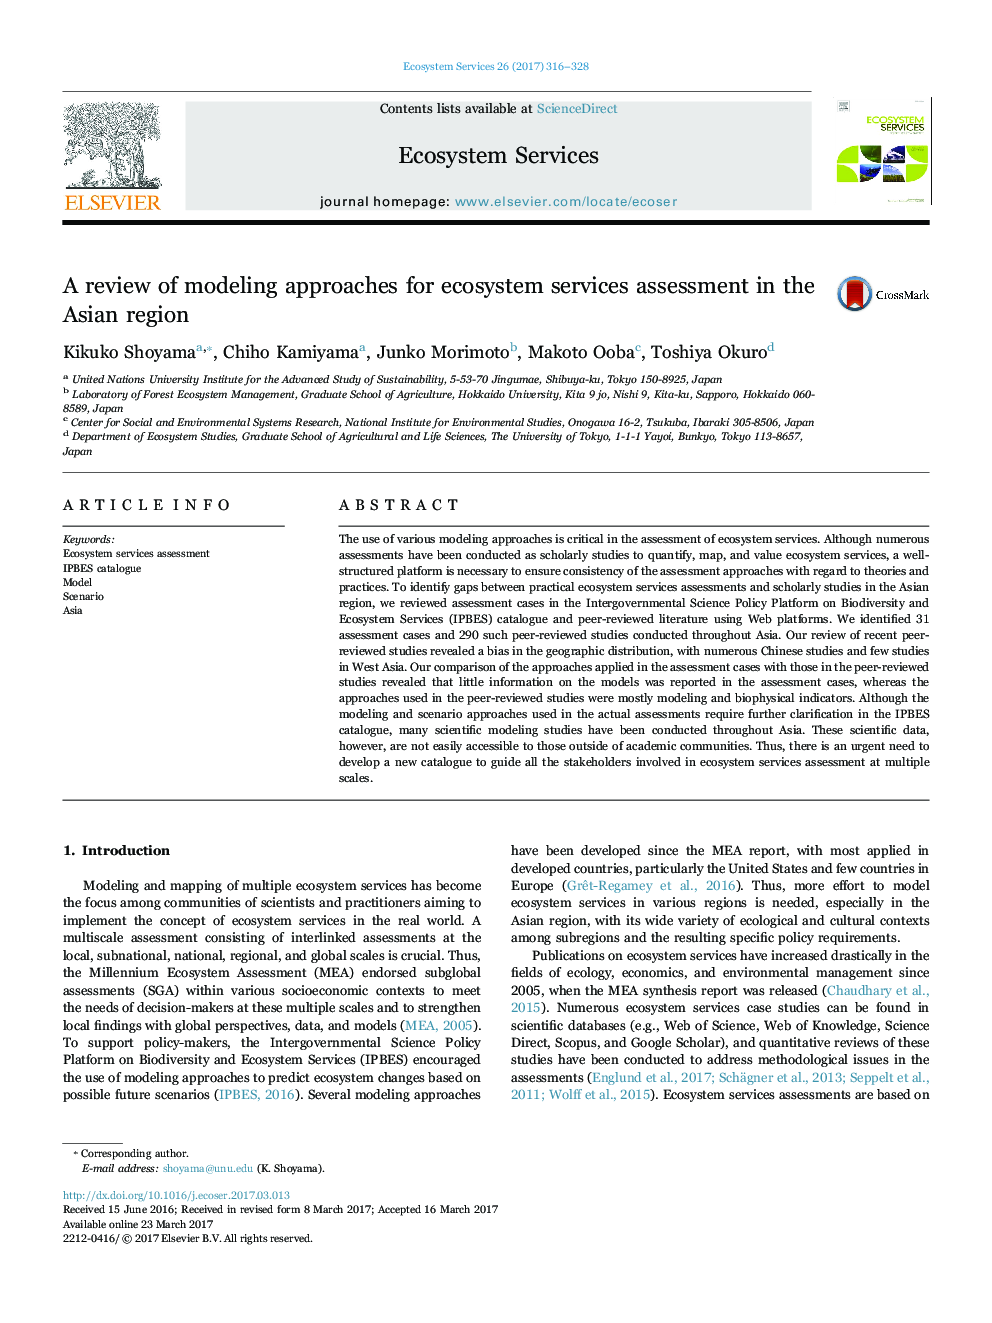 A review of modeling approaches for ecosystem services assessment in the Asian region